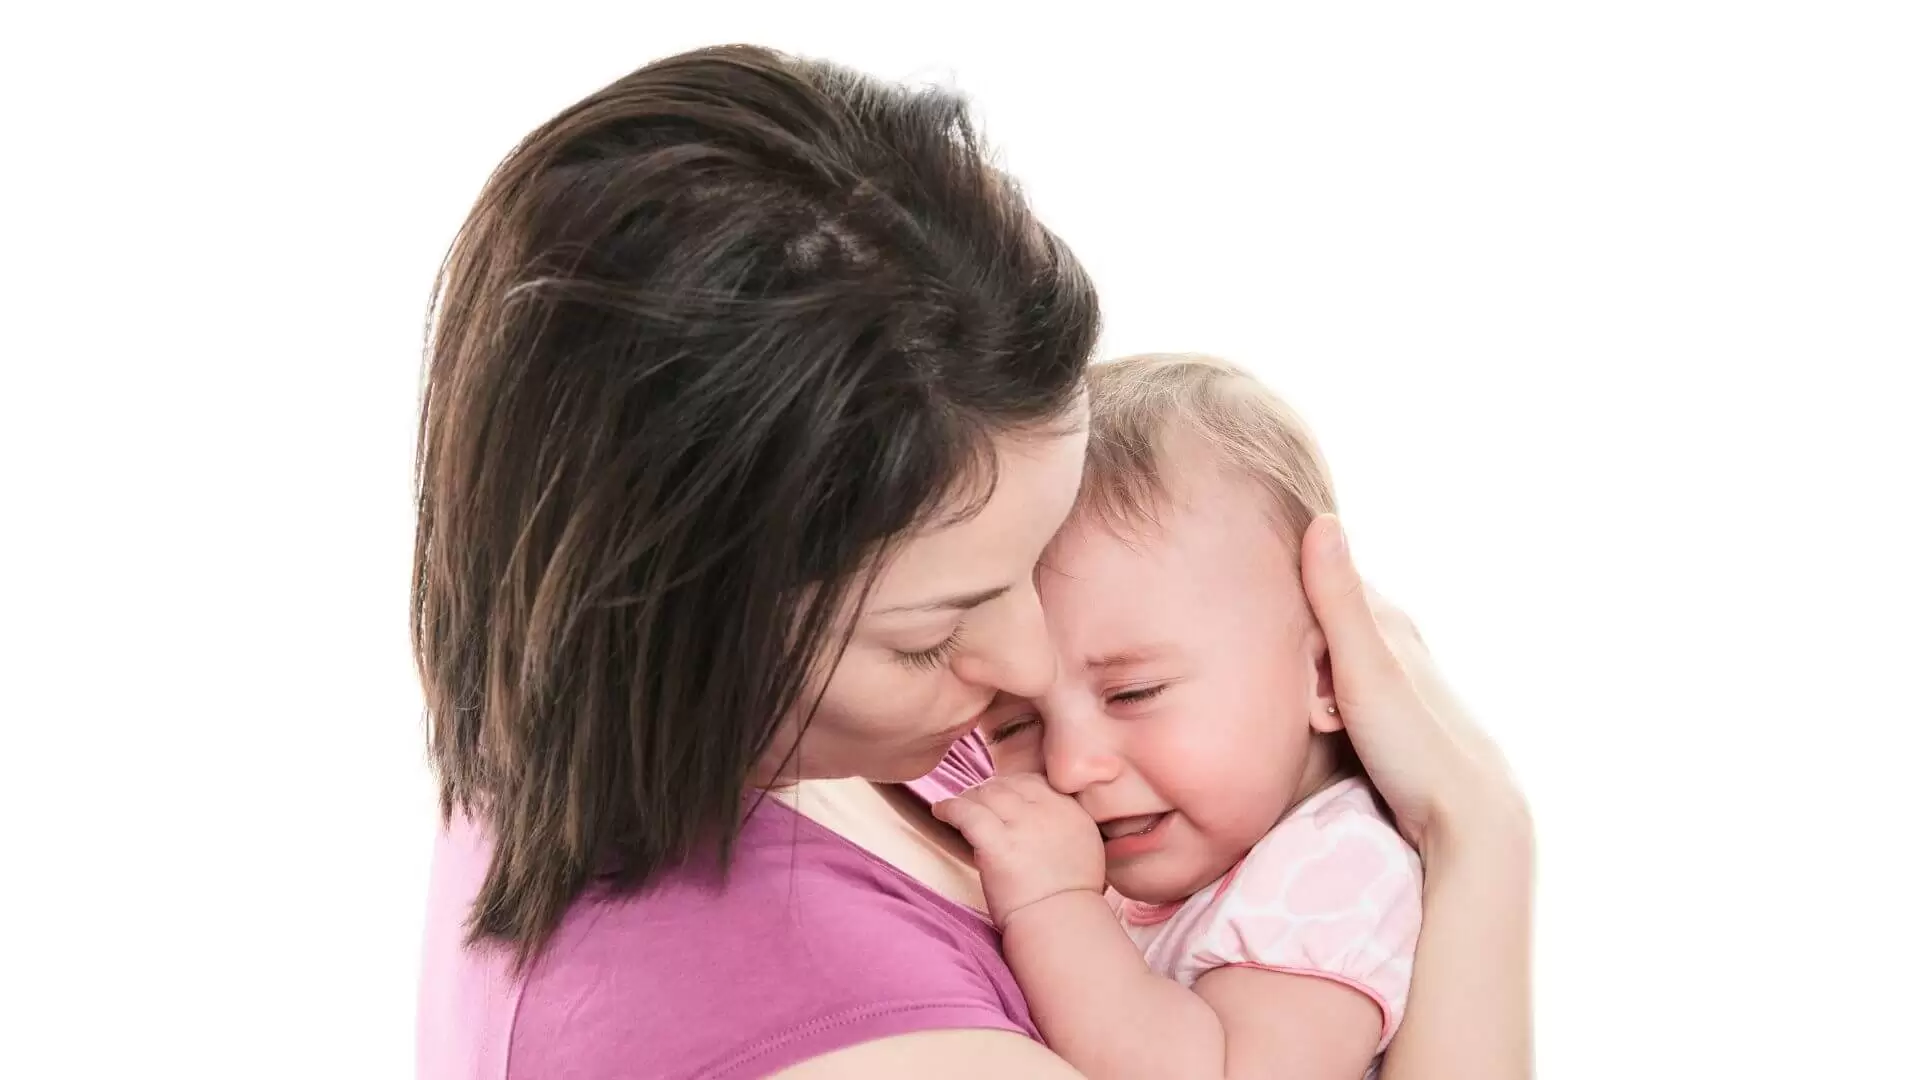 7 WAYS TO CALM YOUR BABY QUICKLY (1)